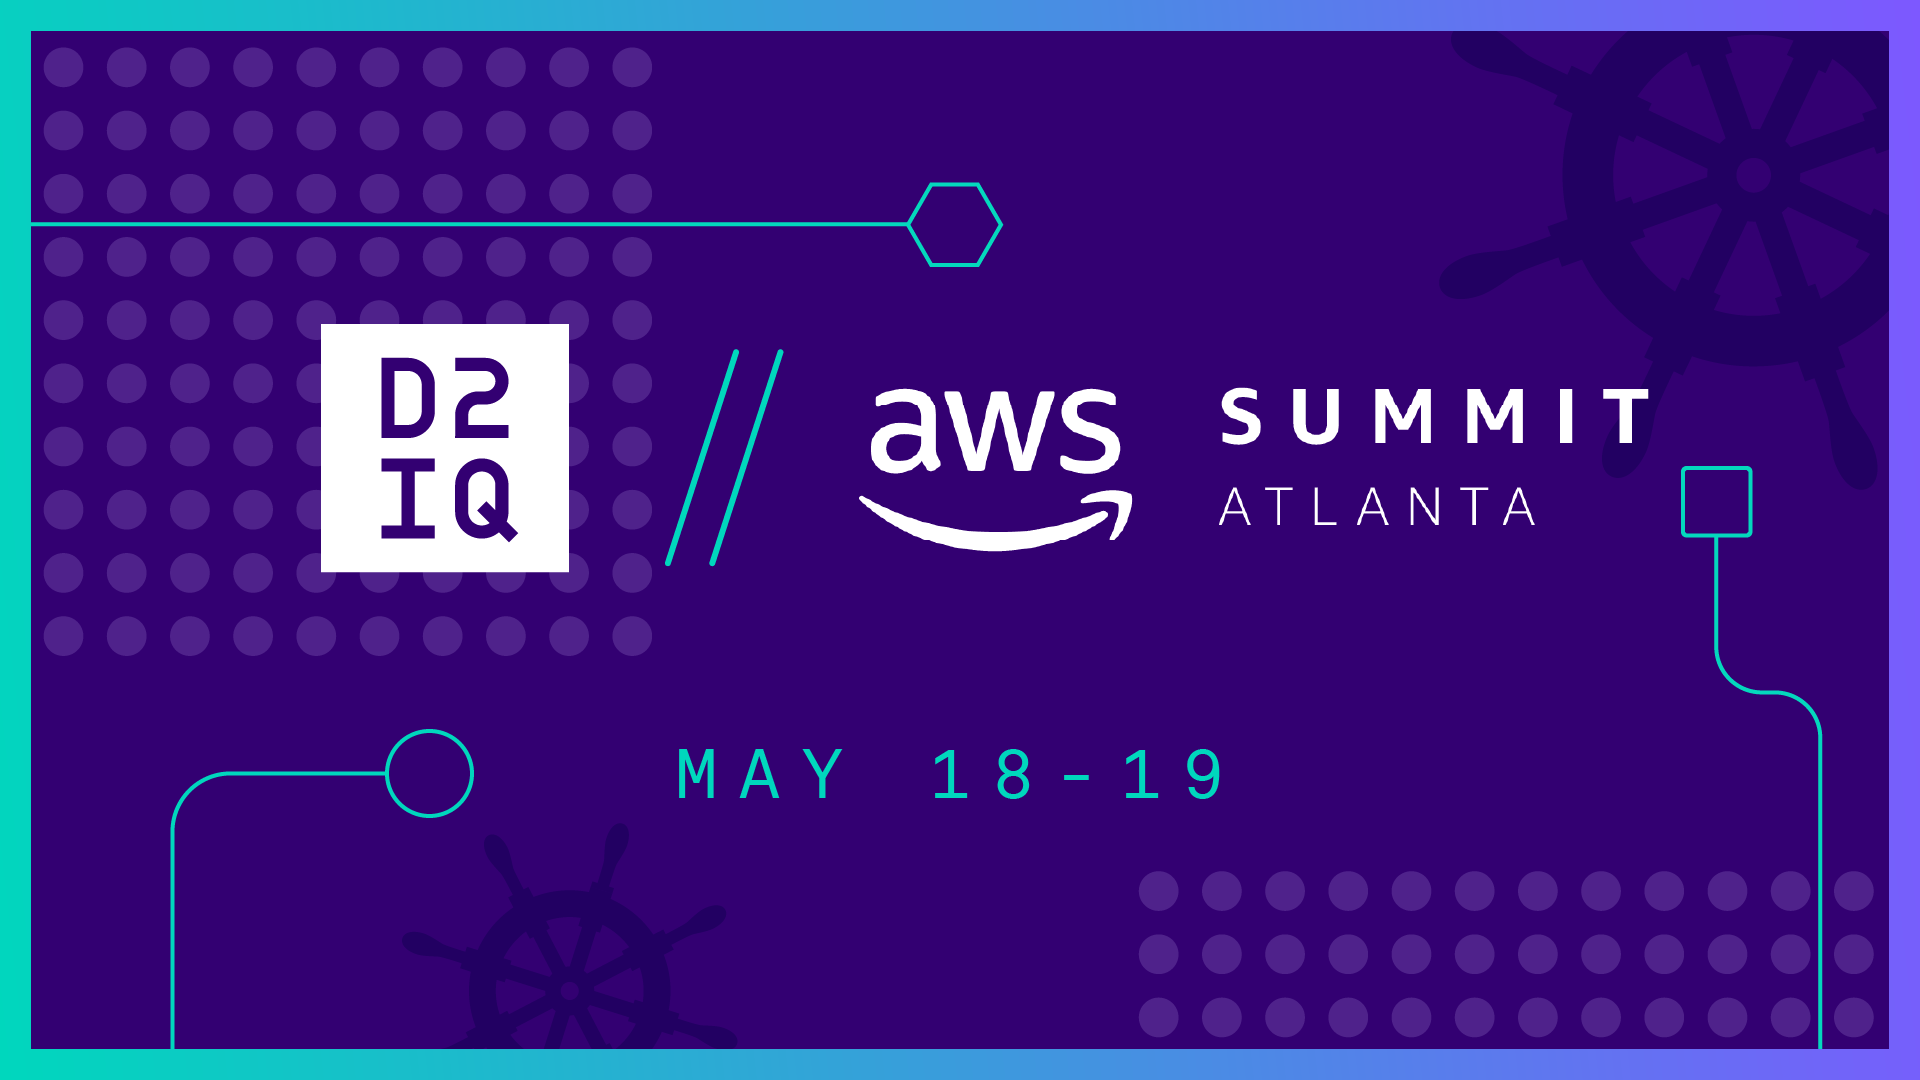 D2iQ and AWS Summit Atlanta logos on a textured purple background. Dates: May 18-19